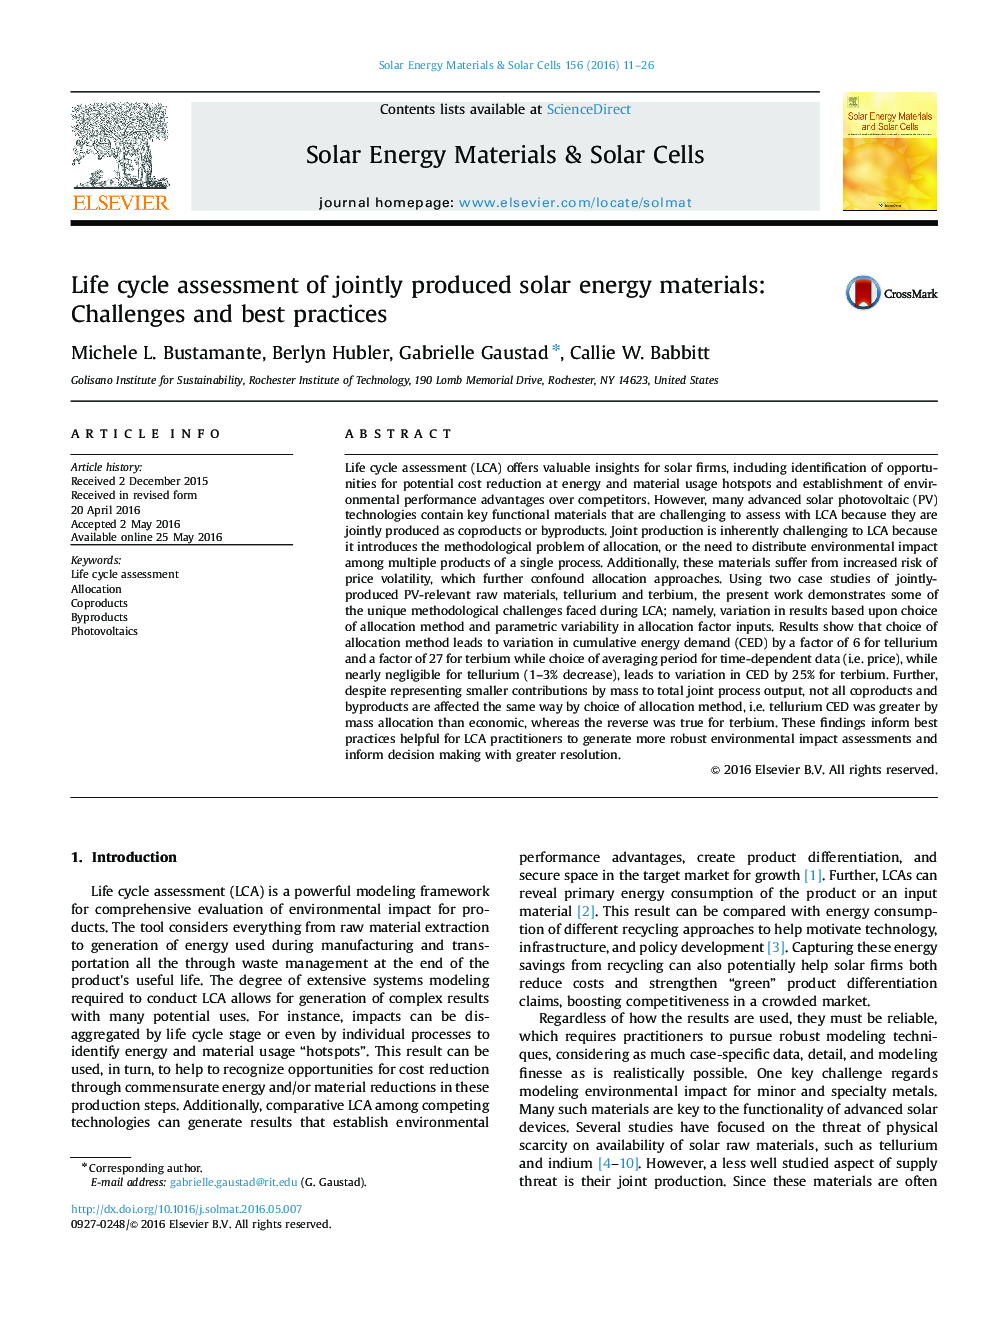 Life cycle assessment of jointly produced solar energy materials: Challenges and best practices